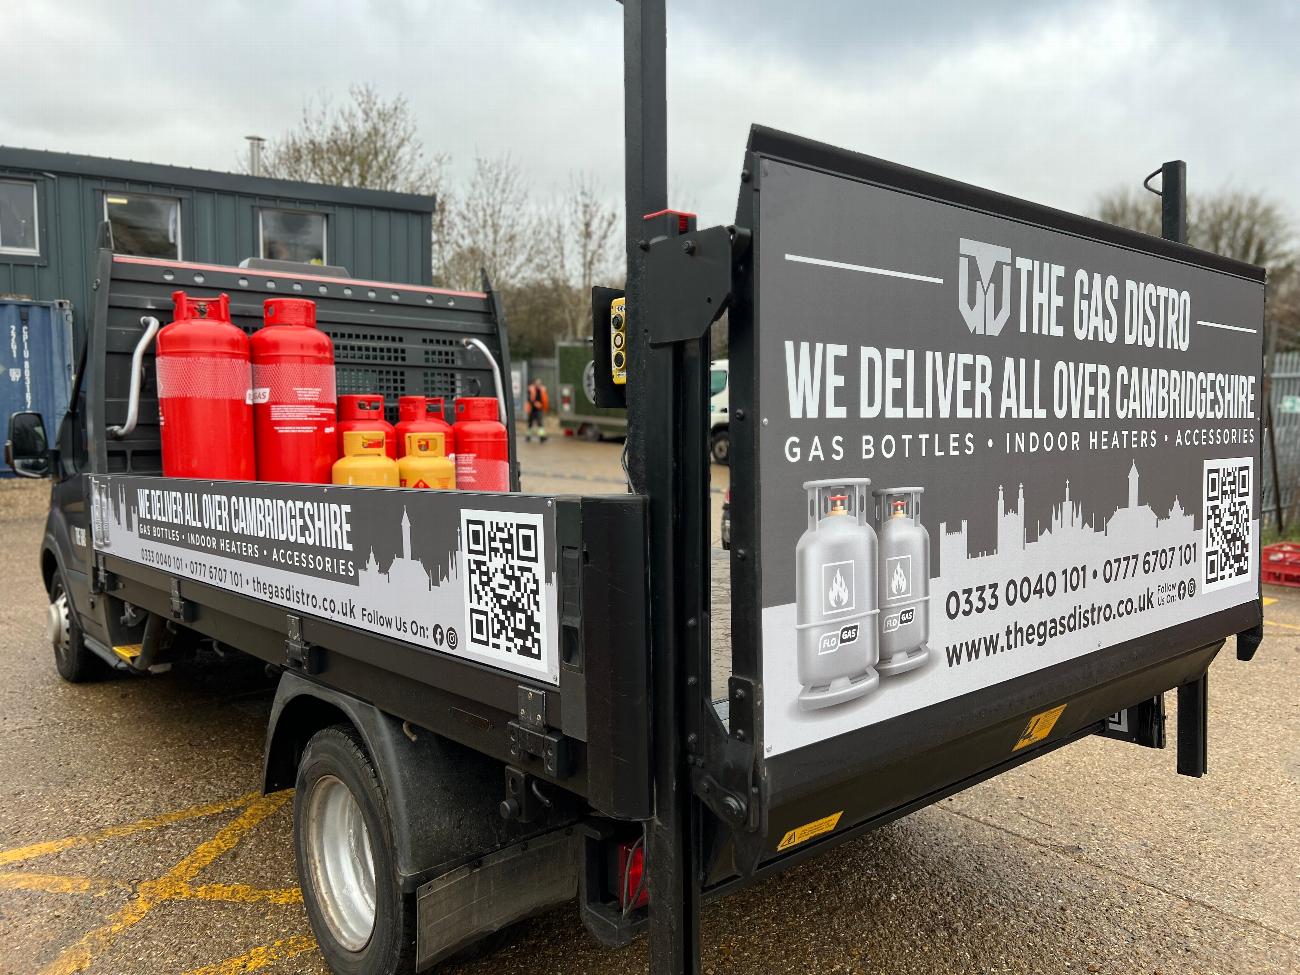 Bottled Gas Delivery Company selling LPG and Propane tanks 